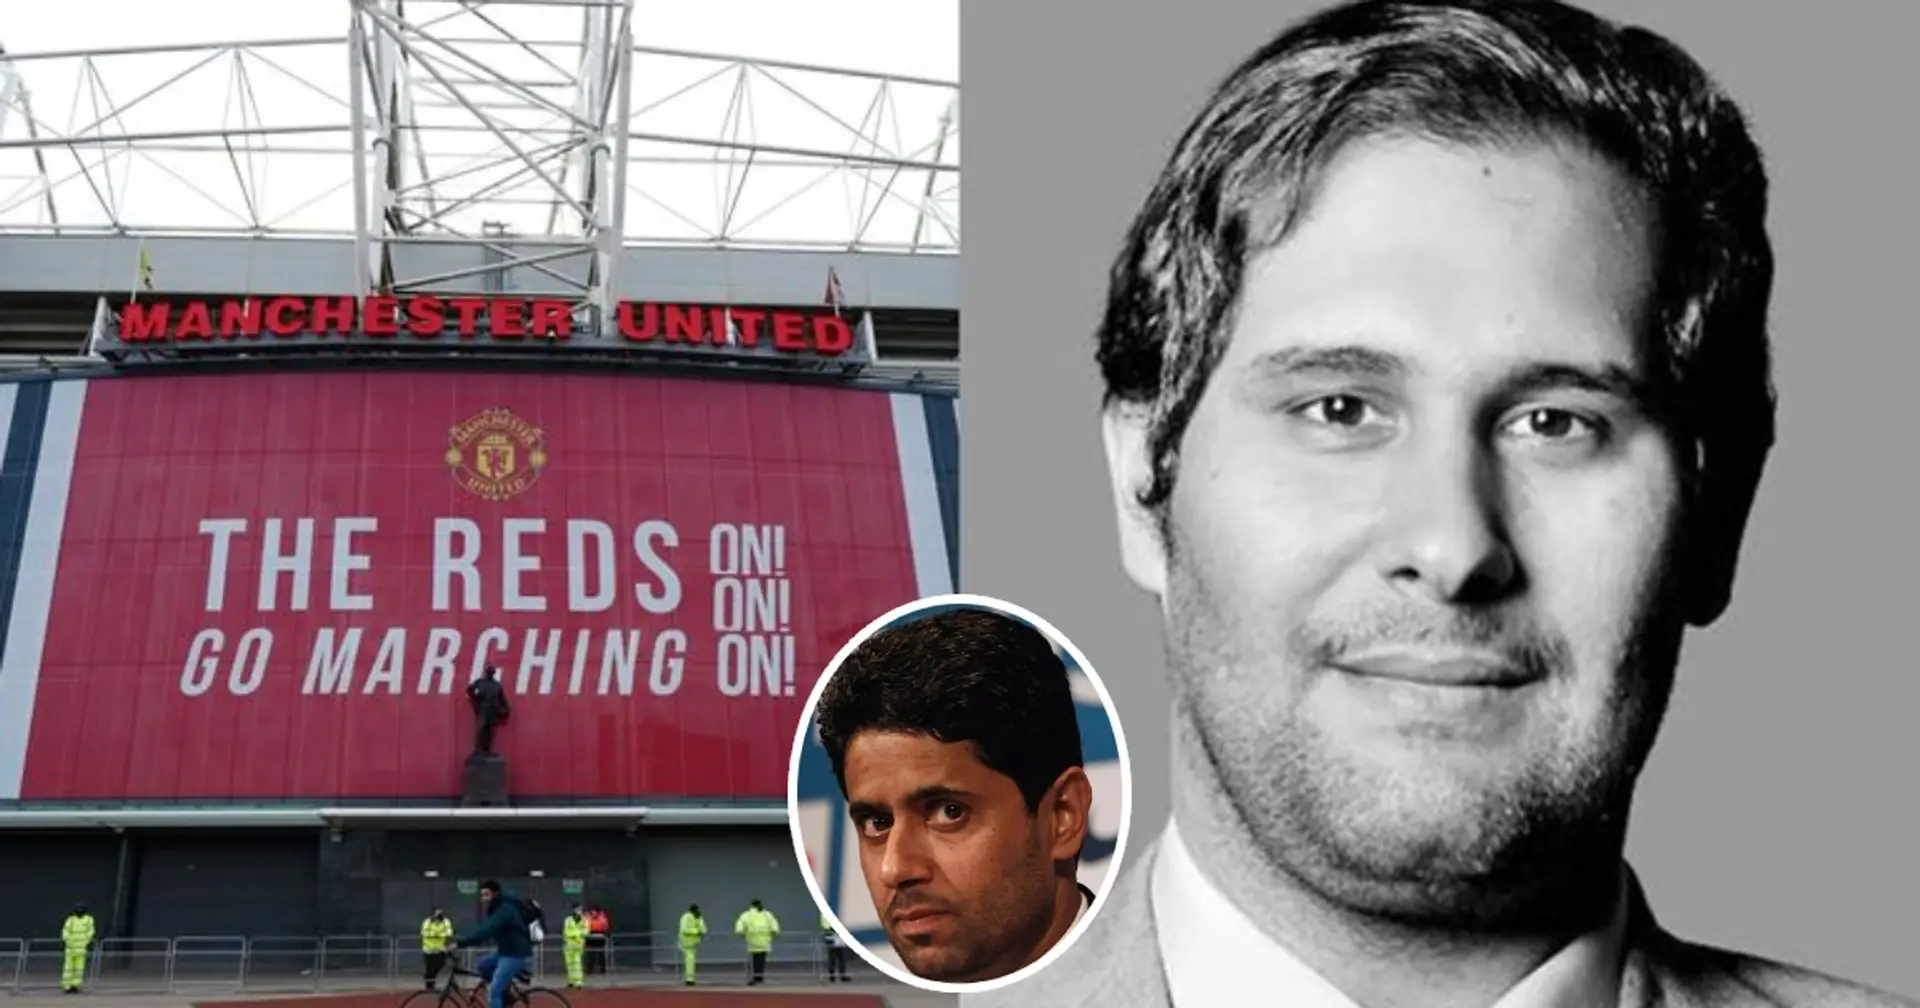 New twist in Man United takeover bid revealed  & 2 more big stories you might've missed 